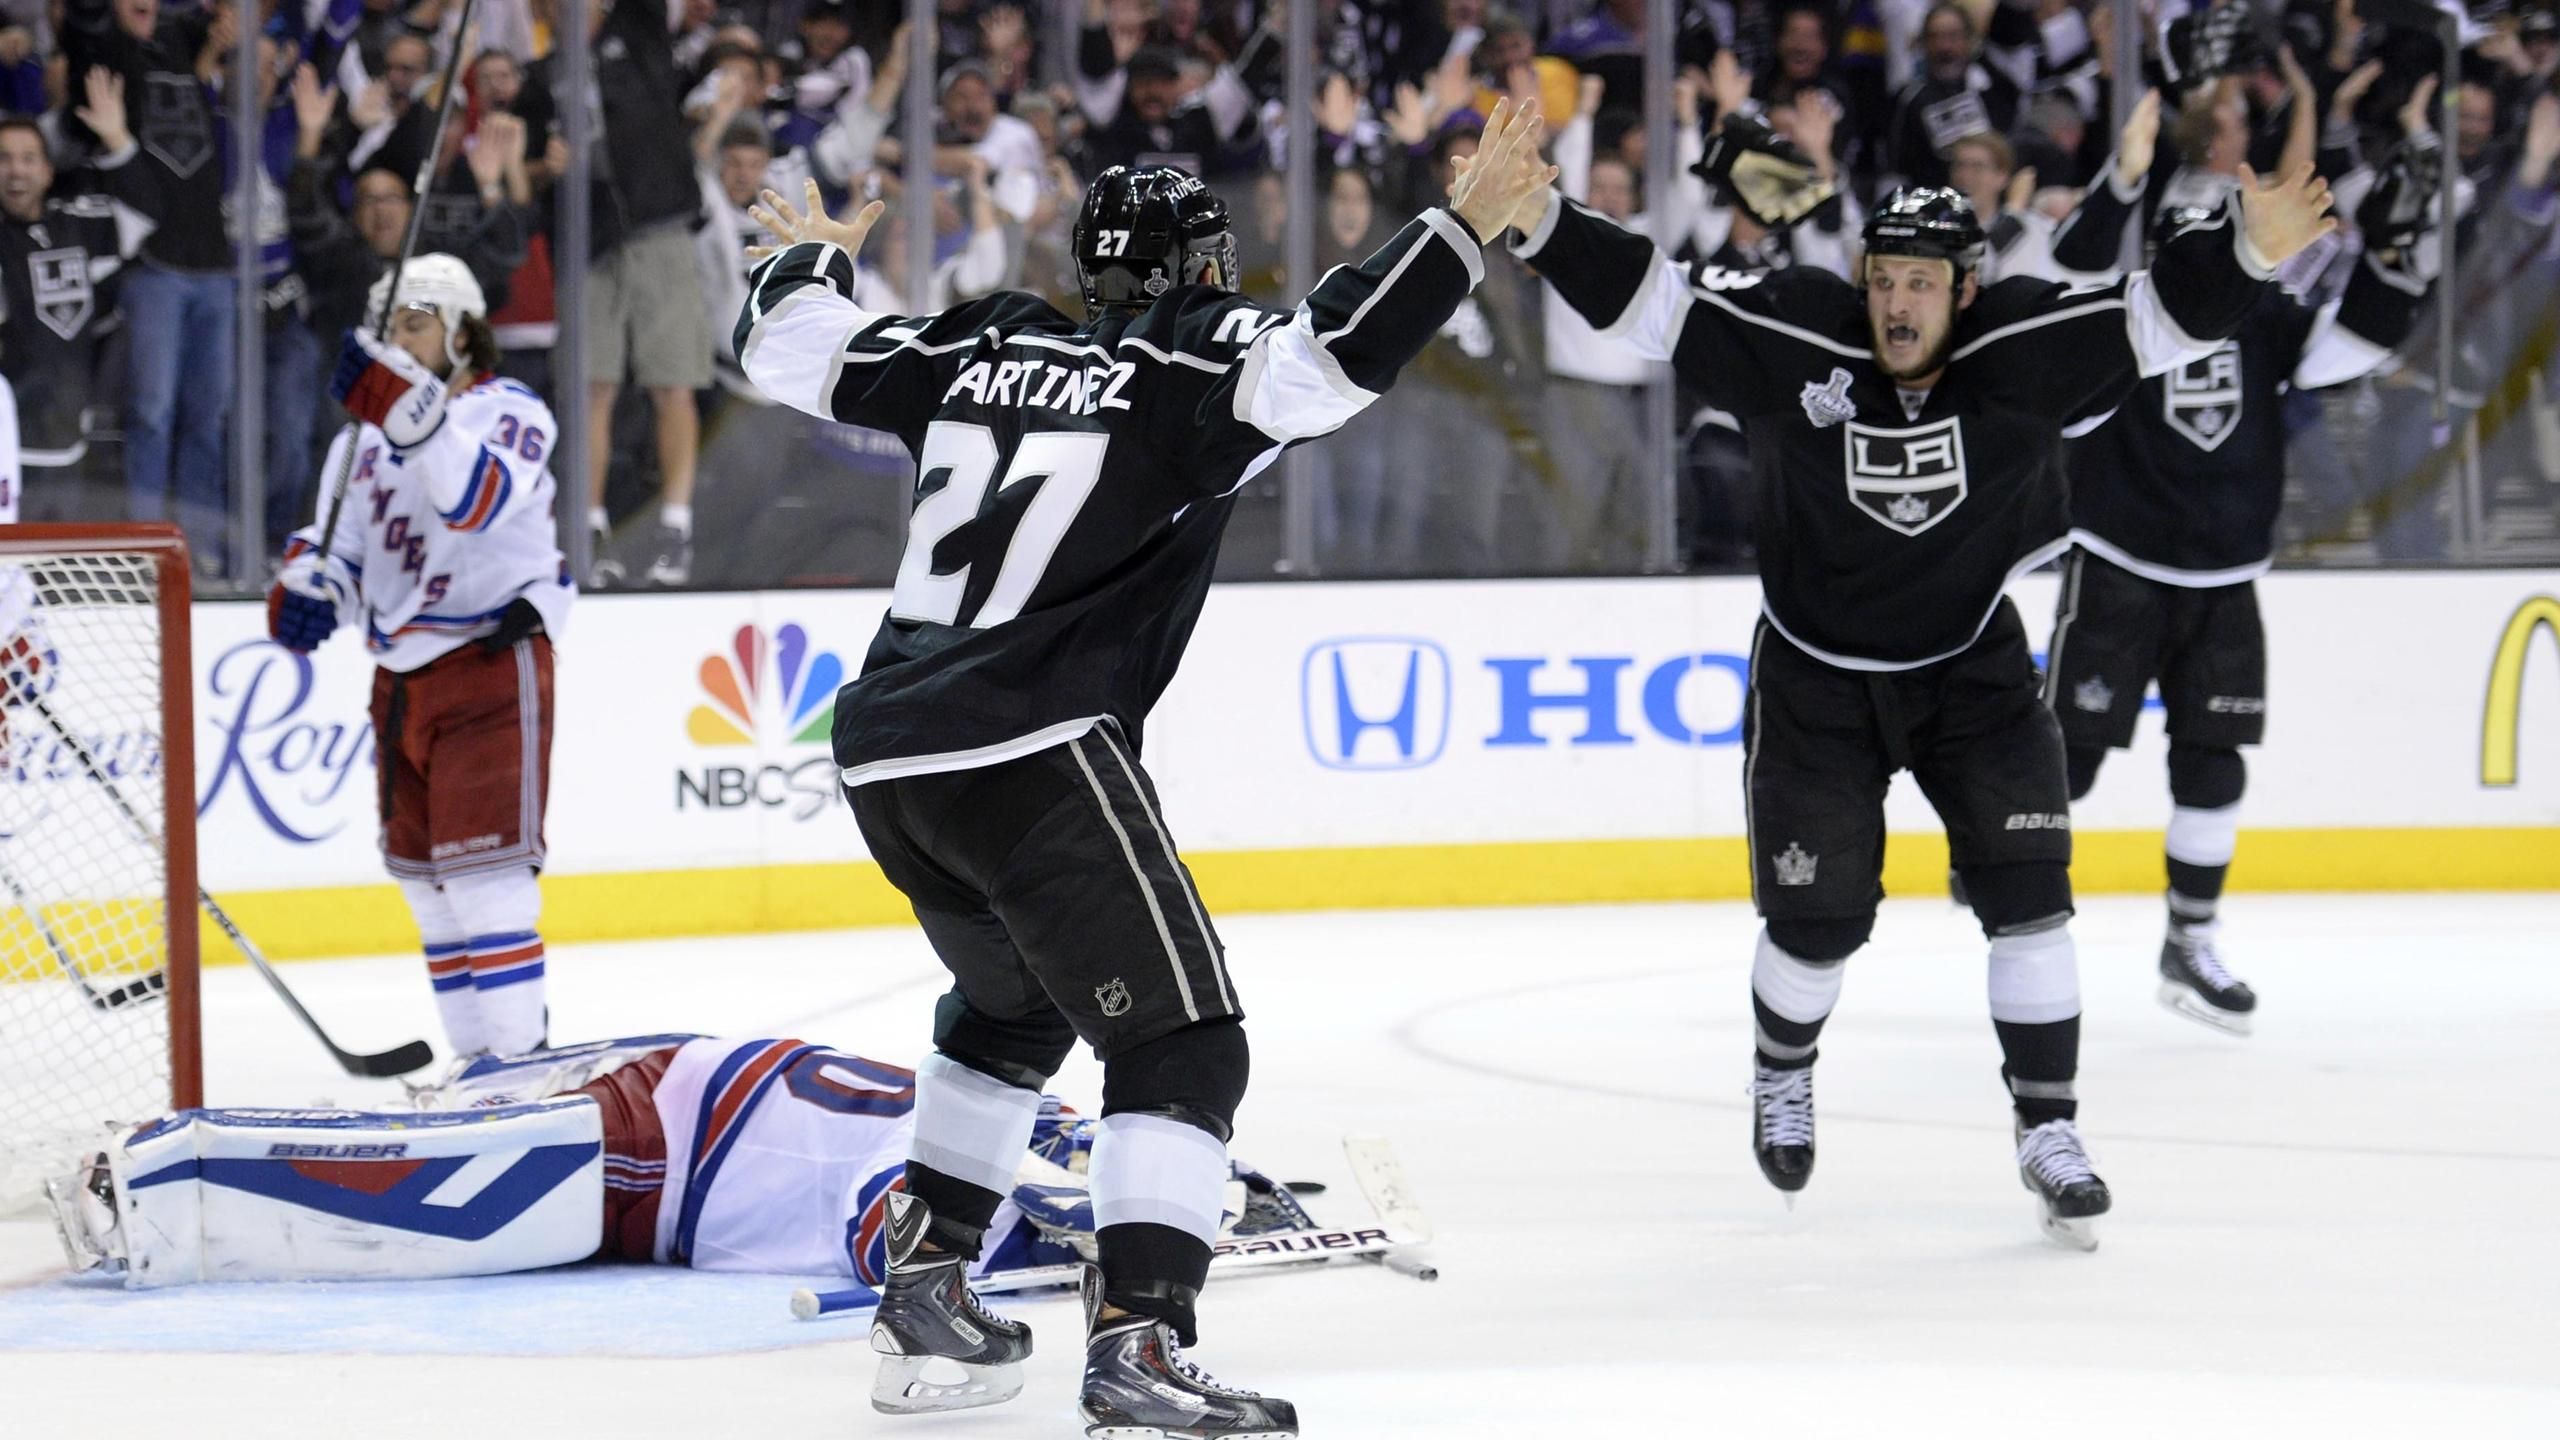 Kings beat Rangers in double overtime to clinch Stanley Cup